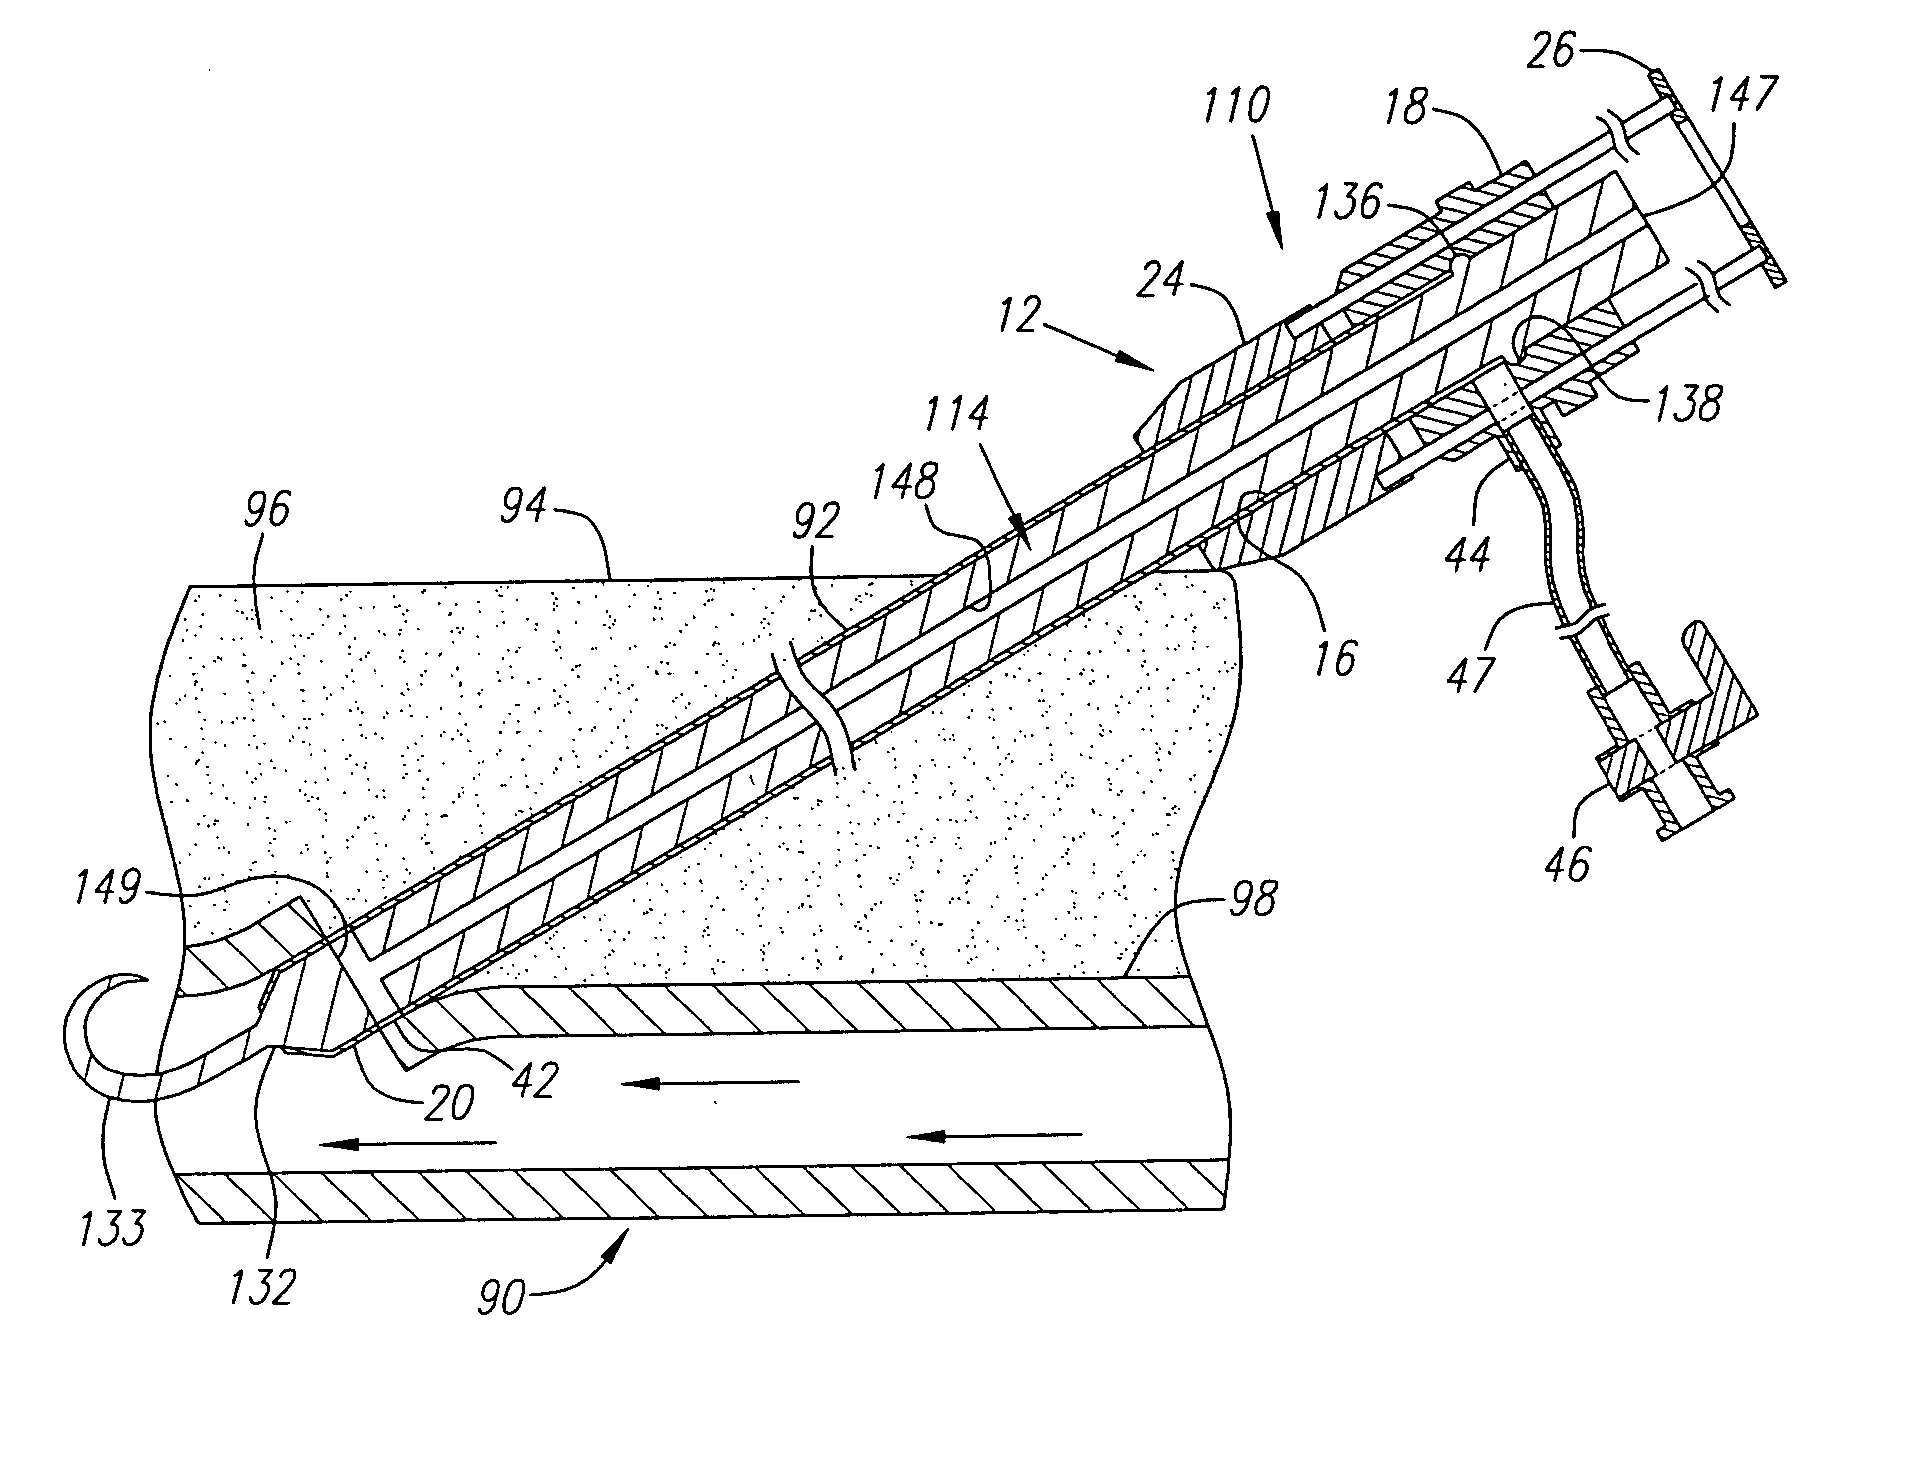 Apparatus and methods for positioning a vascular sheath